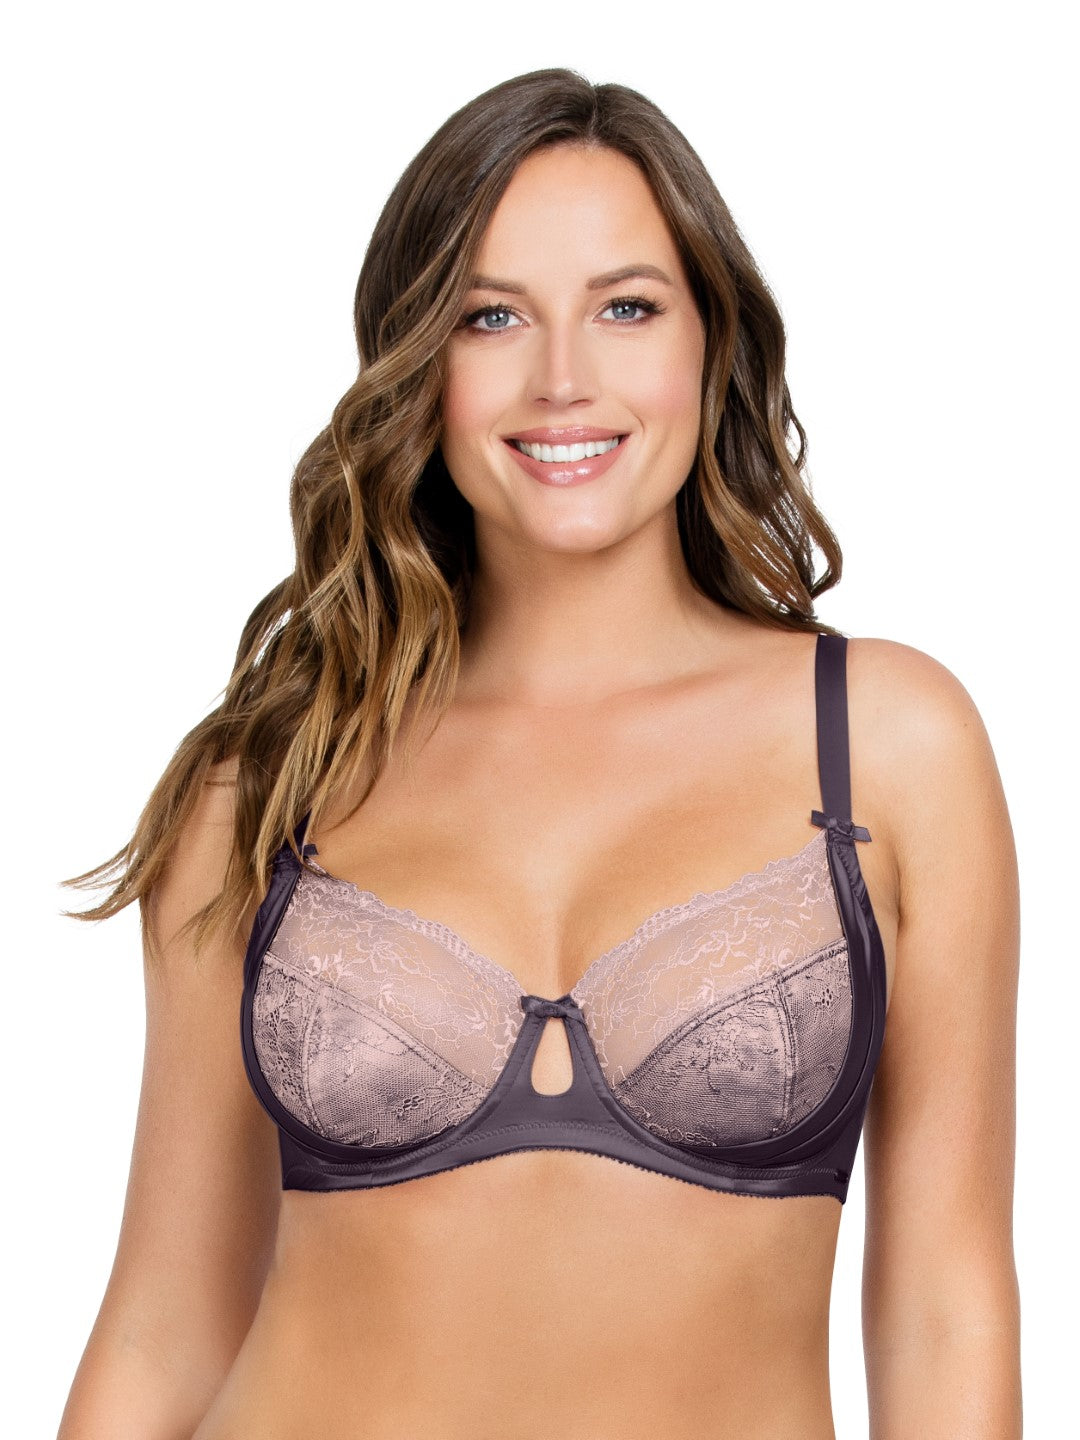 Black for Friday Deals! KBODIU Everyday Bras for Women, Plus Size